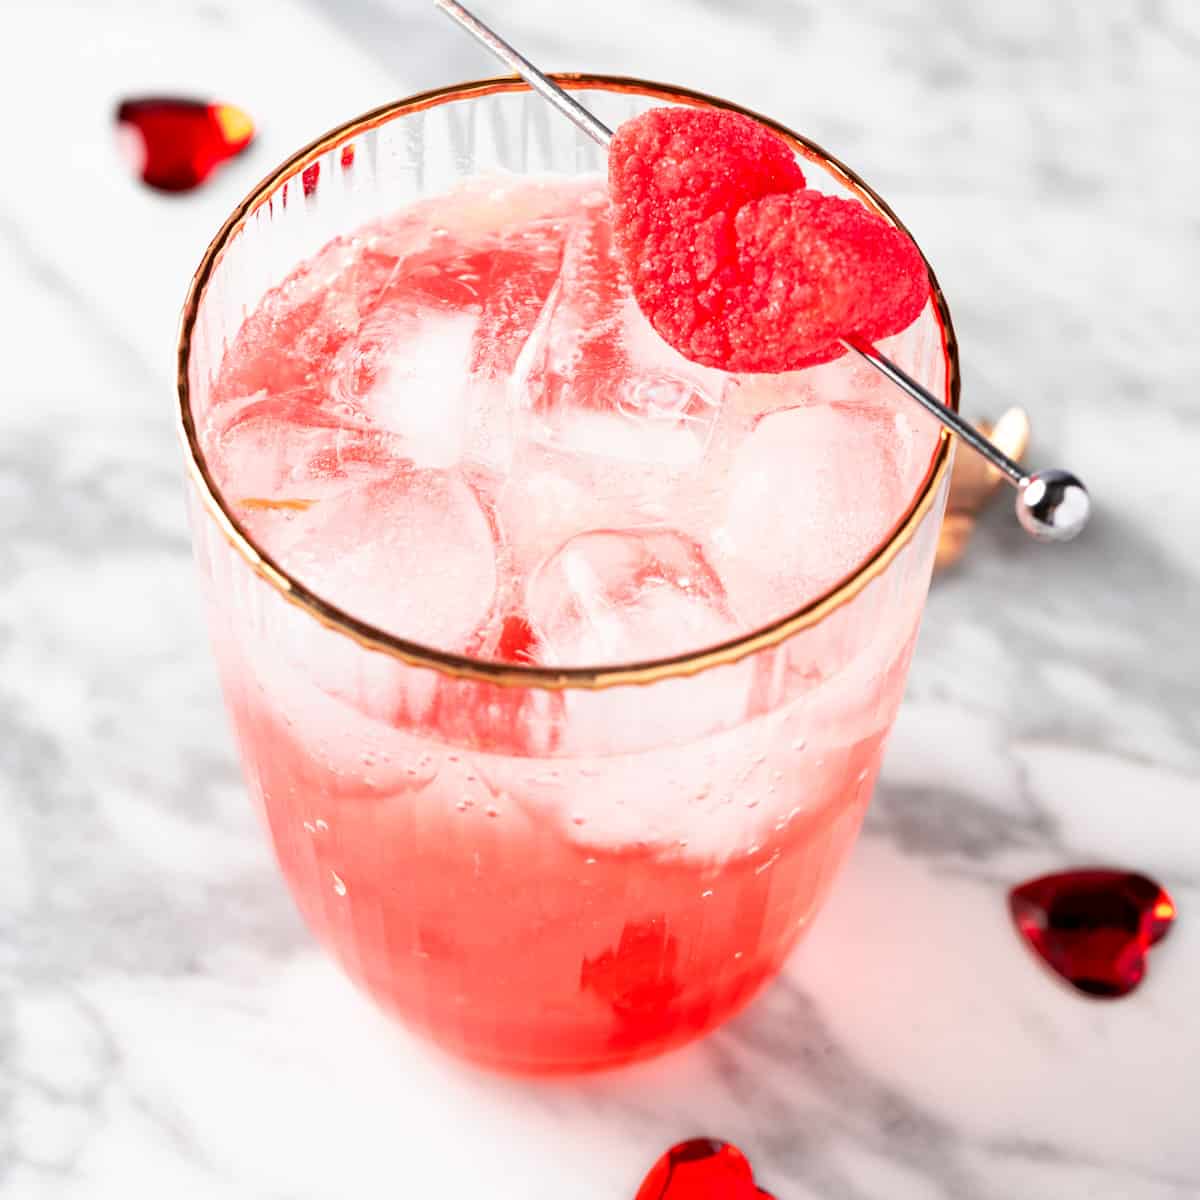 A Valentine’s Day Mocktail garnished with a heart marshmallow.